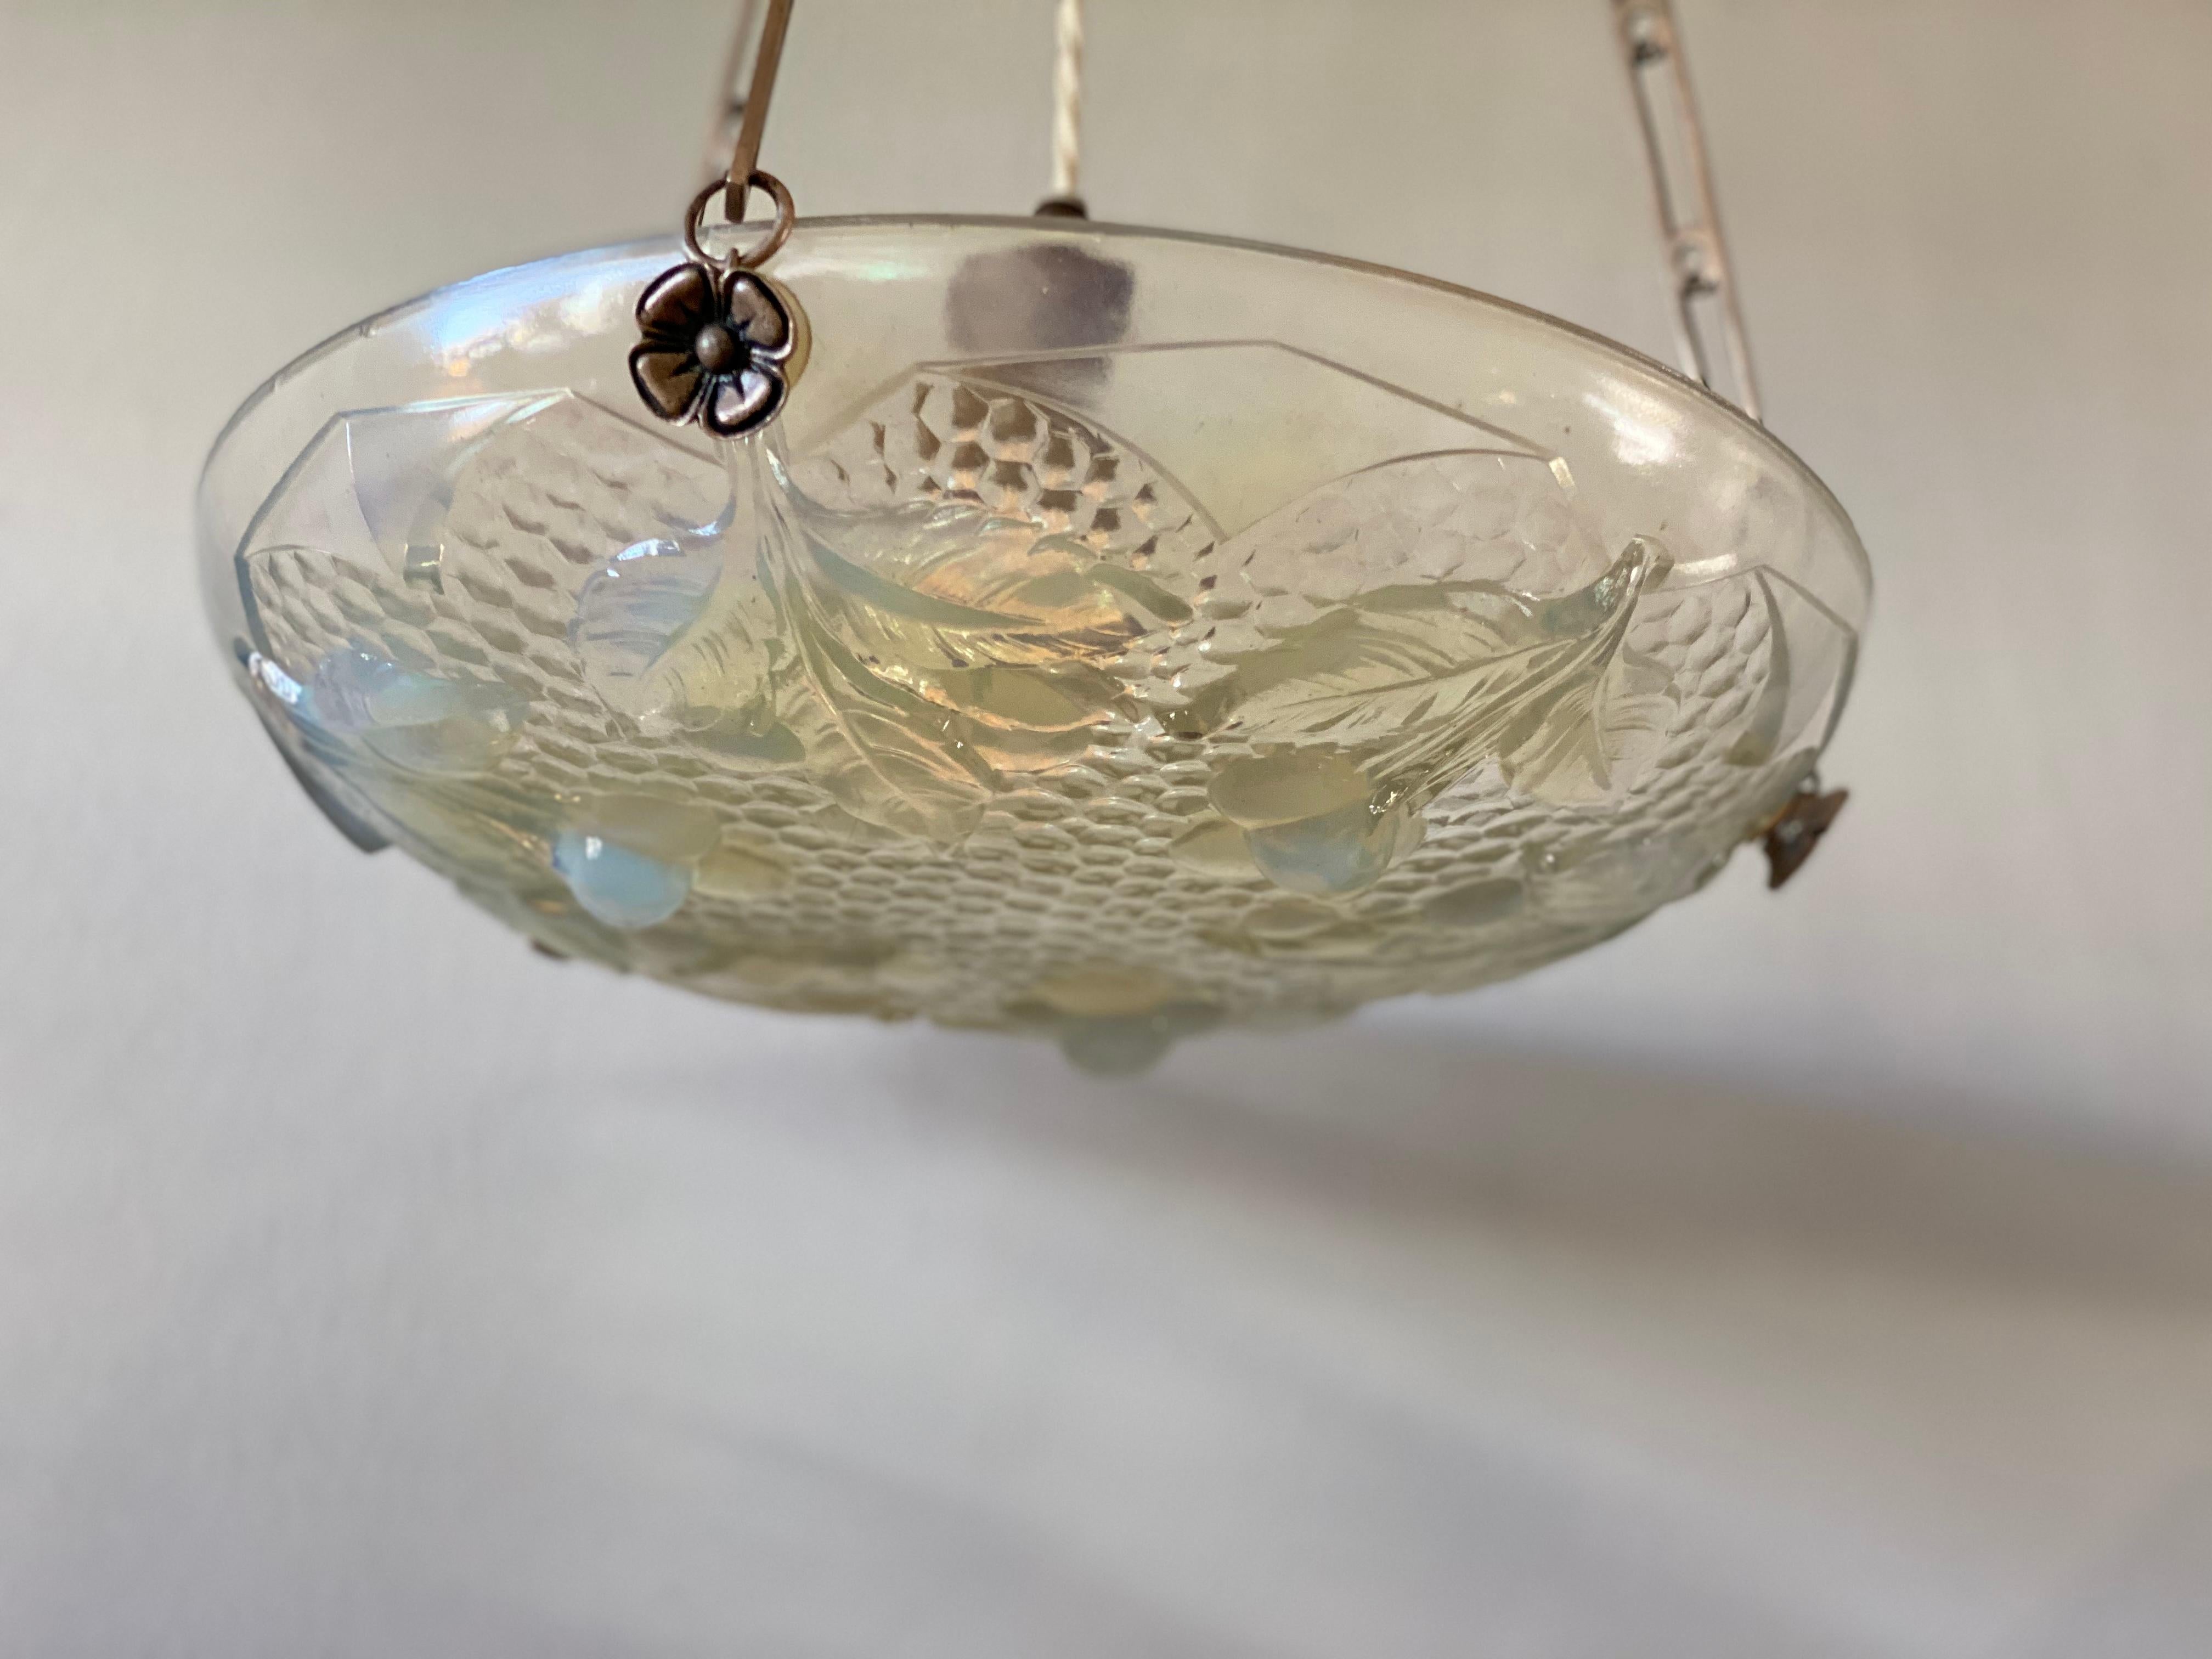 Early 20th Century Art Deco Pendant Lamp in Opaline Glass, France 1920s, Iridescent Glass